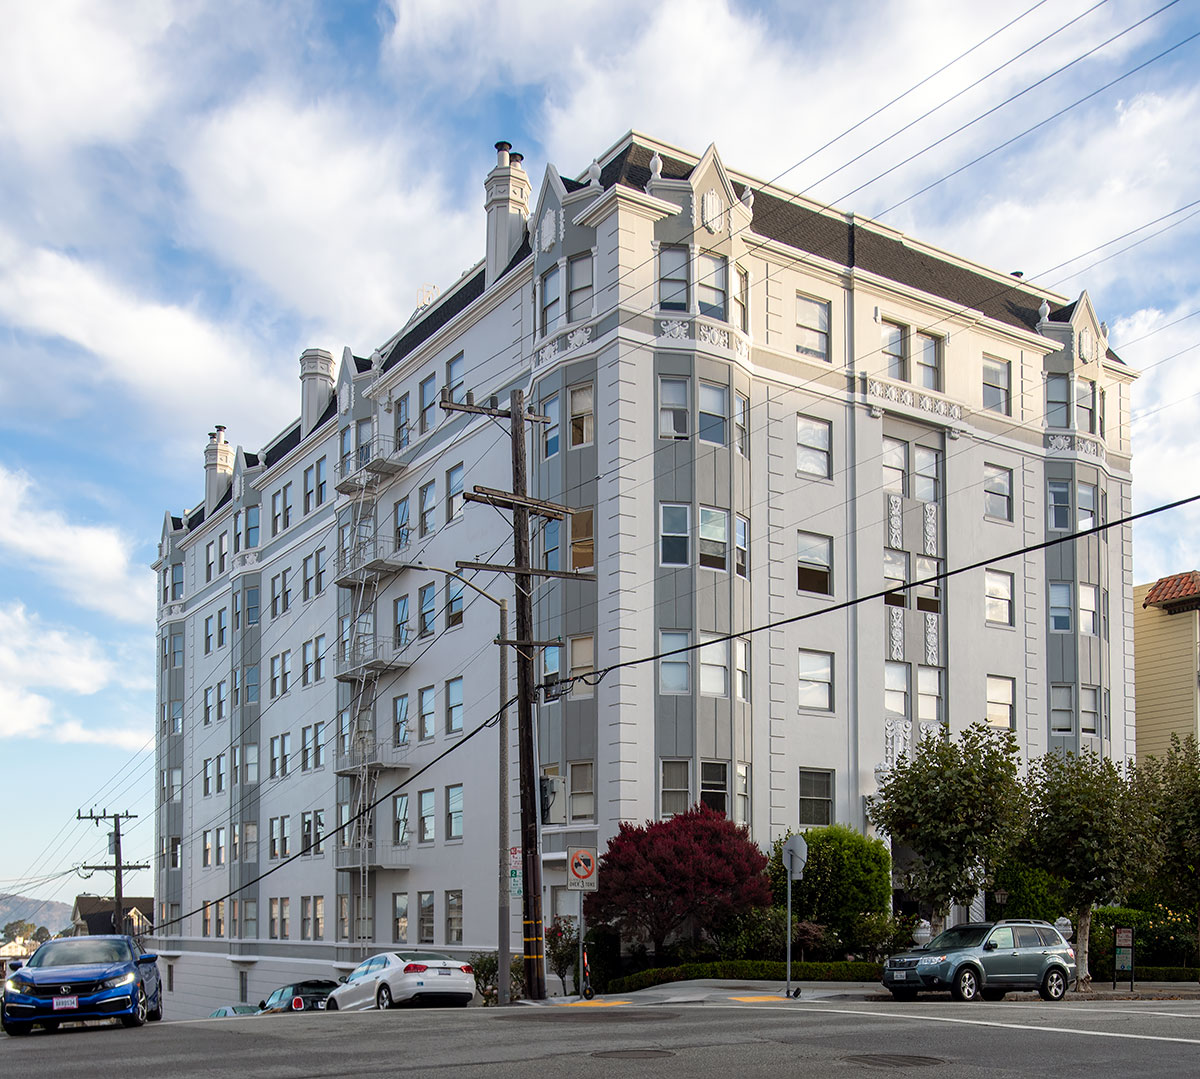 1890 Broadway in Pacific Heights, designed by H. C. Baumann, built 1938